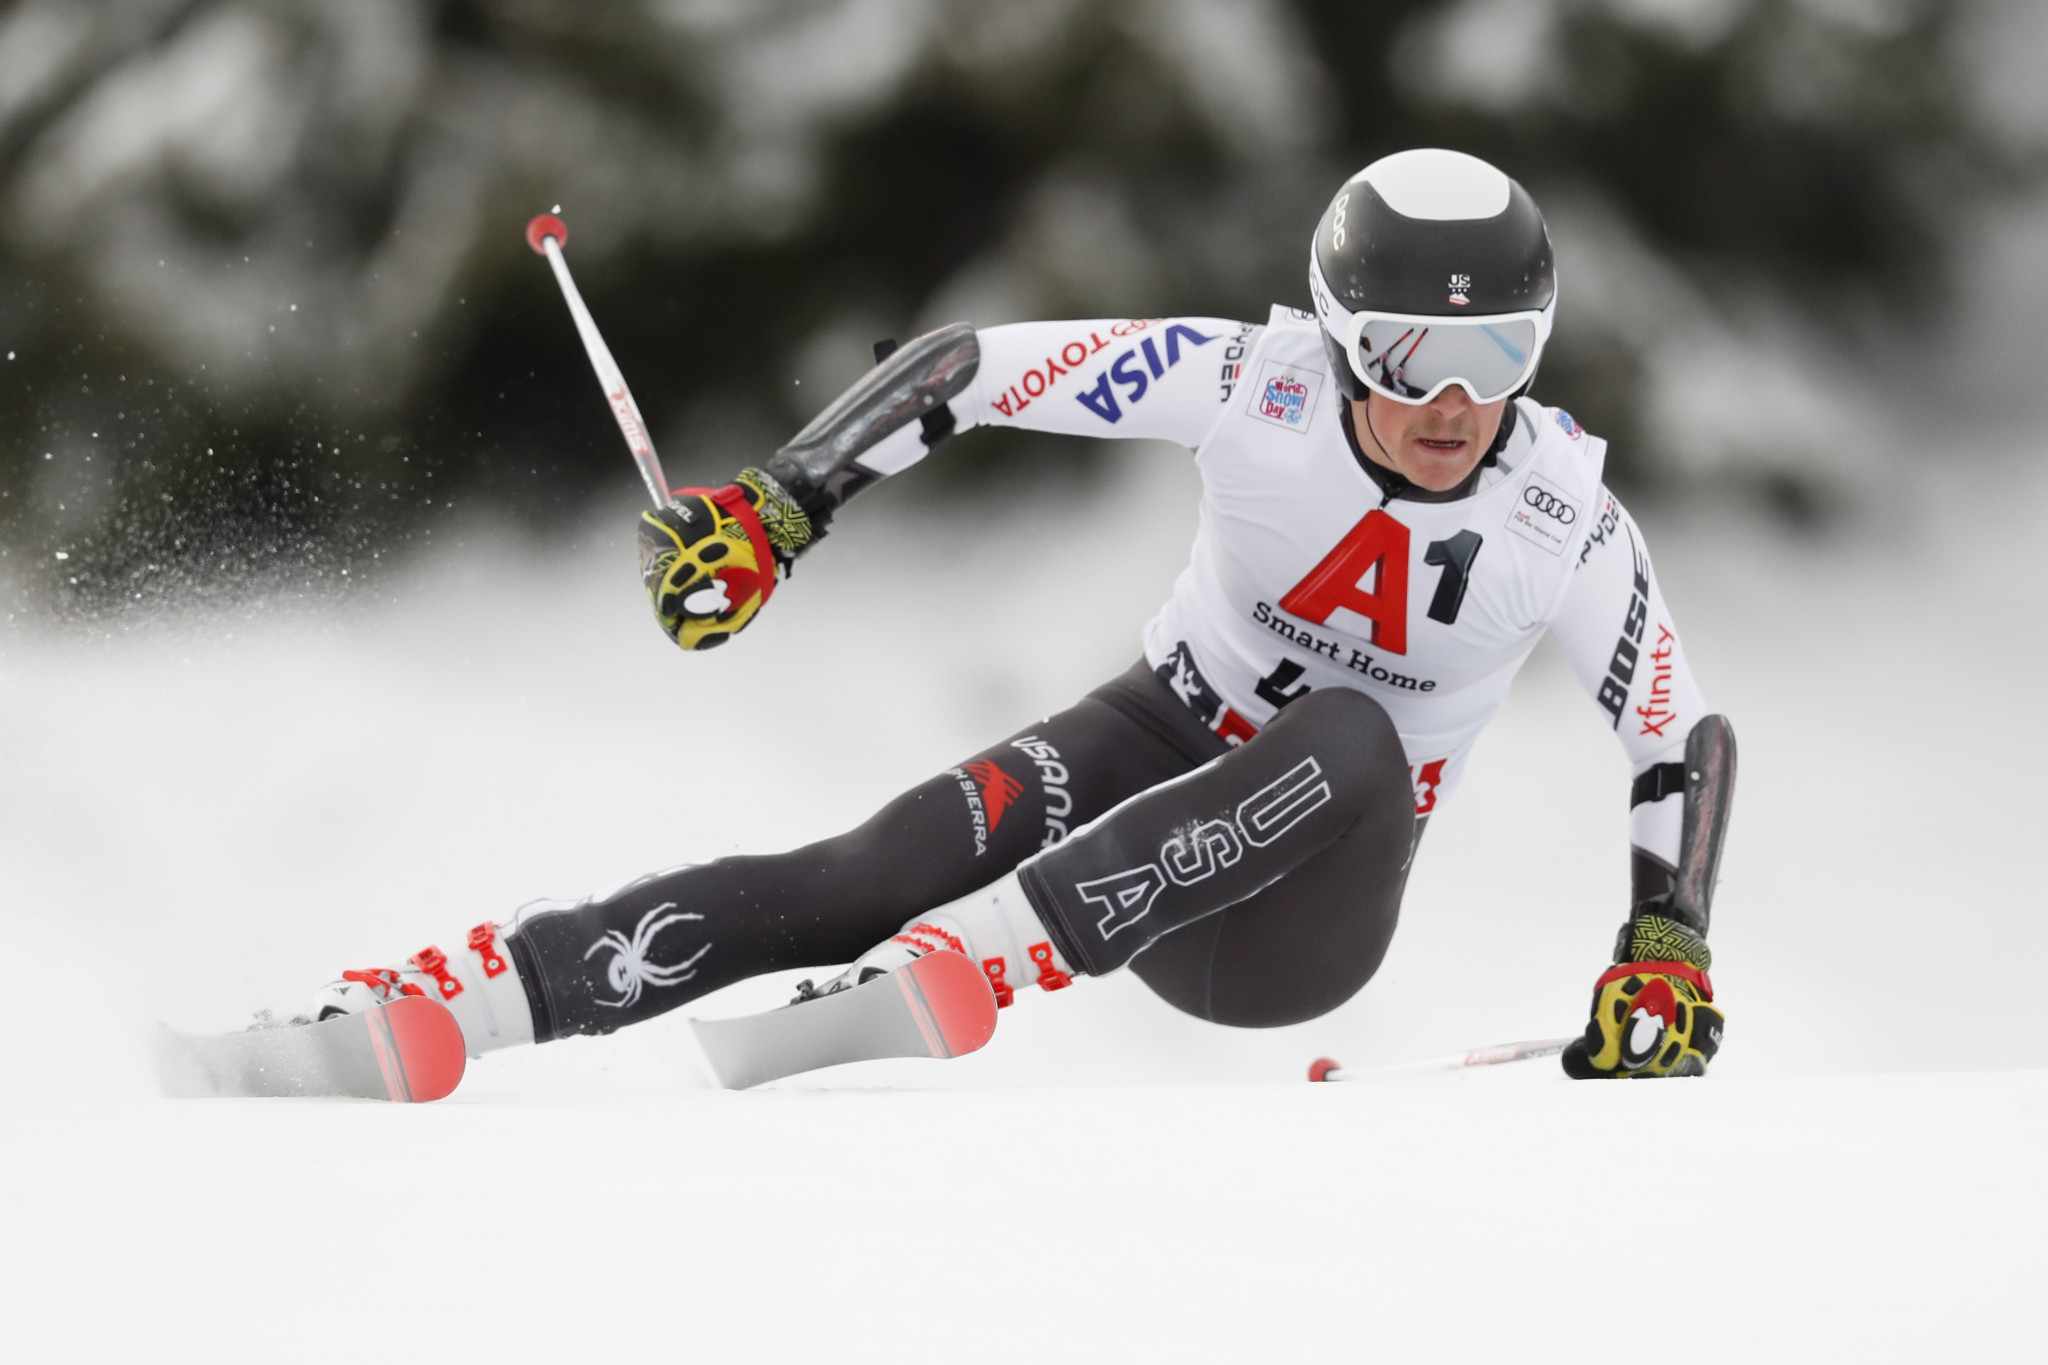 First medal for US at FIS World Junior Alpine Skiing Championships as Radamus wins men's super-G